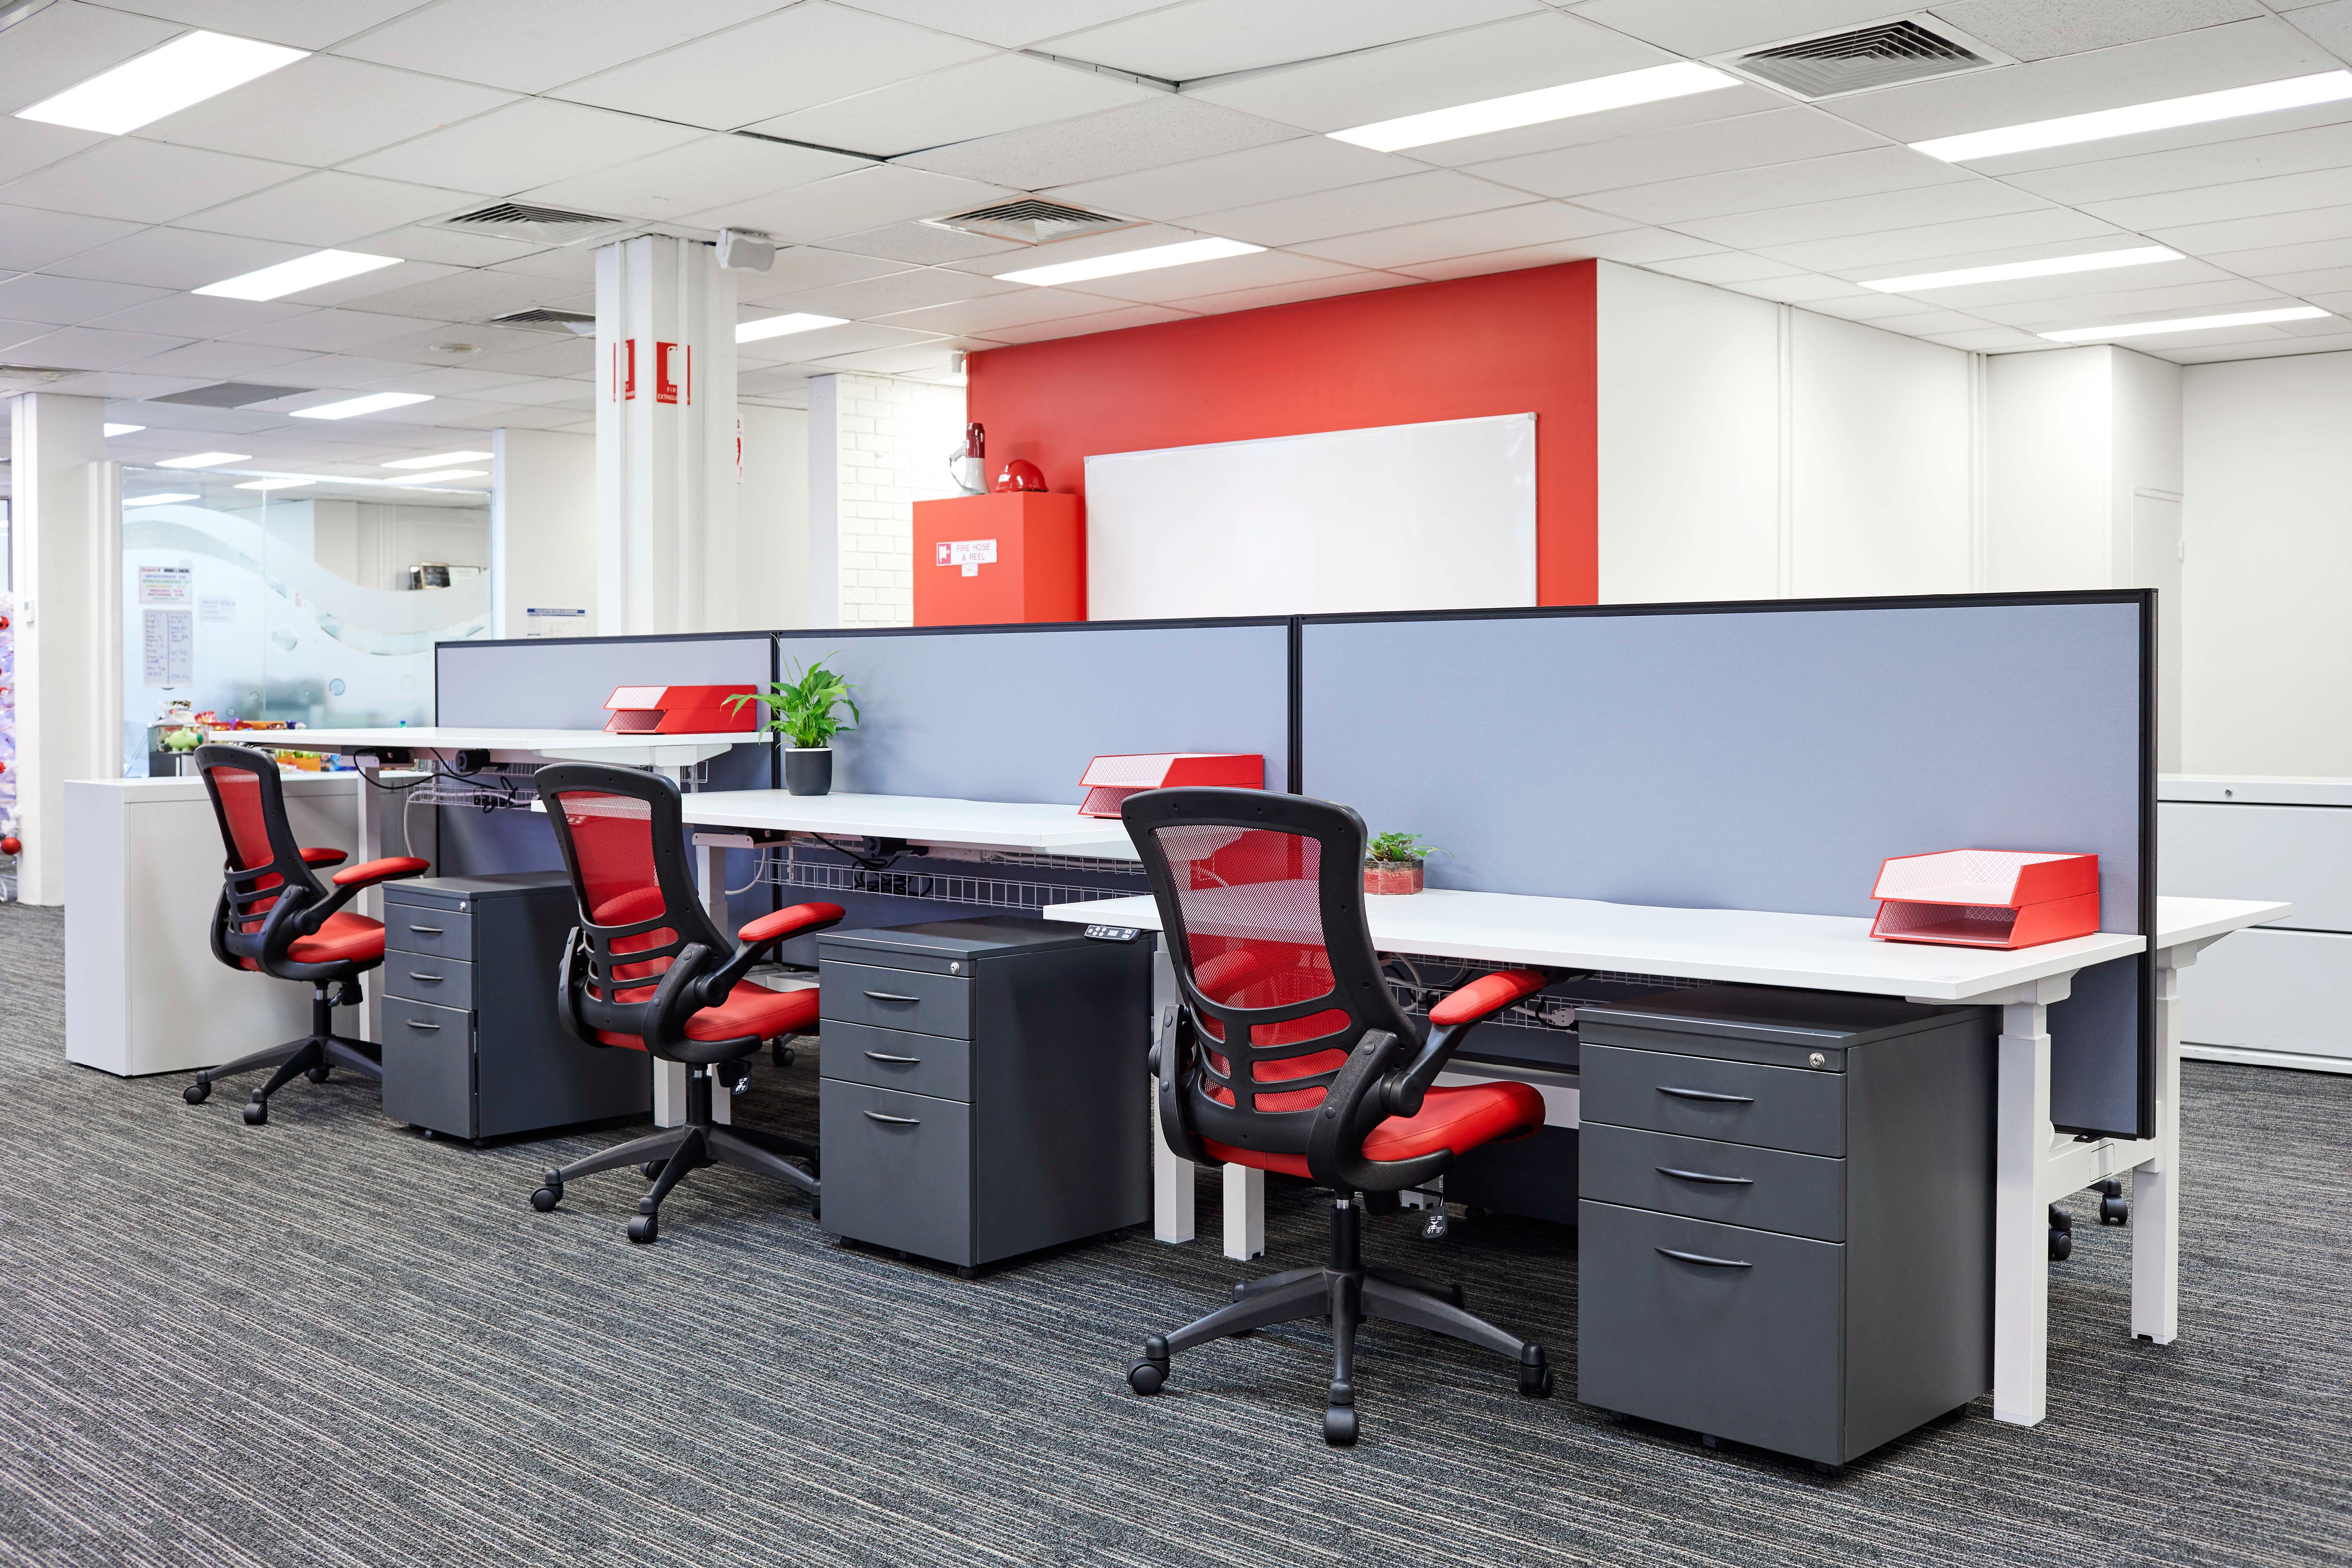 Office Fitout Solutions - Case study: A flexible and healthy workspace